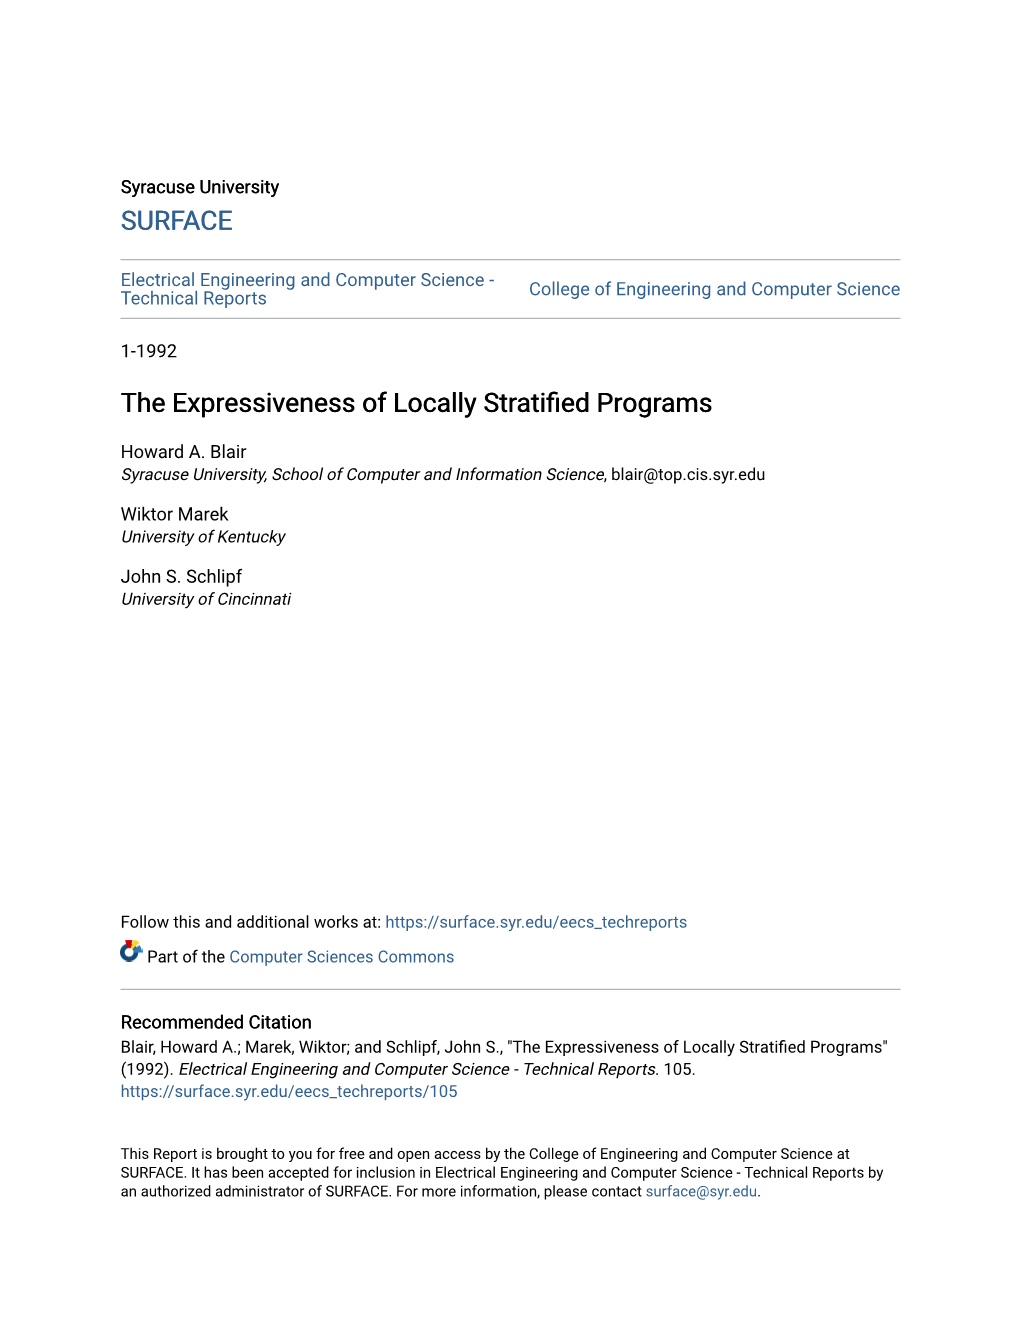 The Expressiveness of Locally Stratified Programs